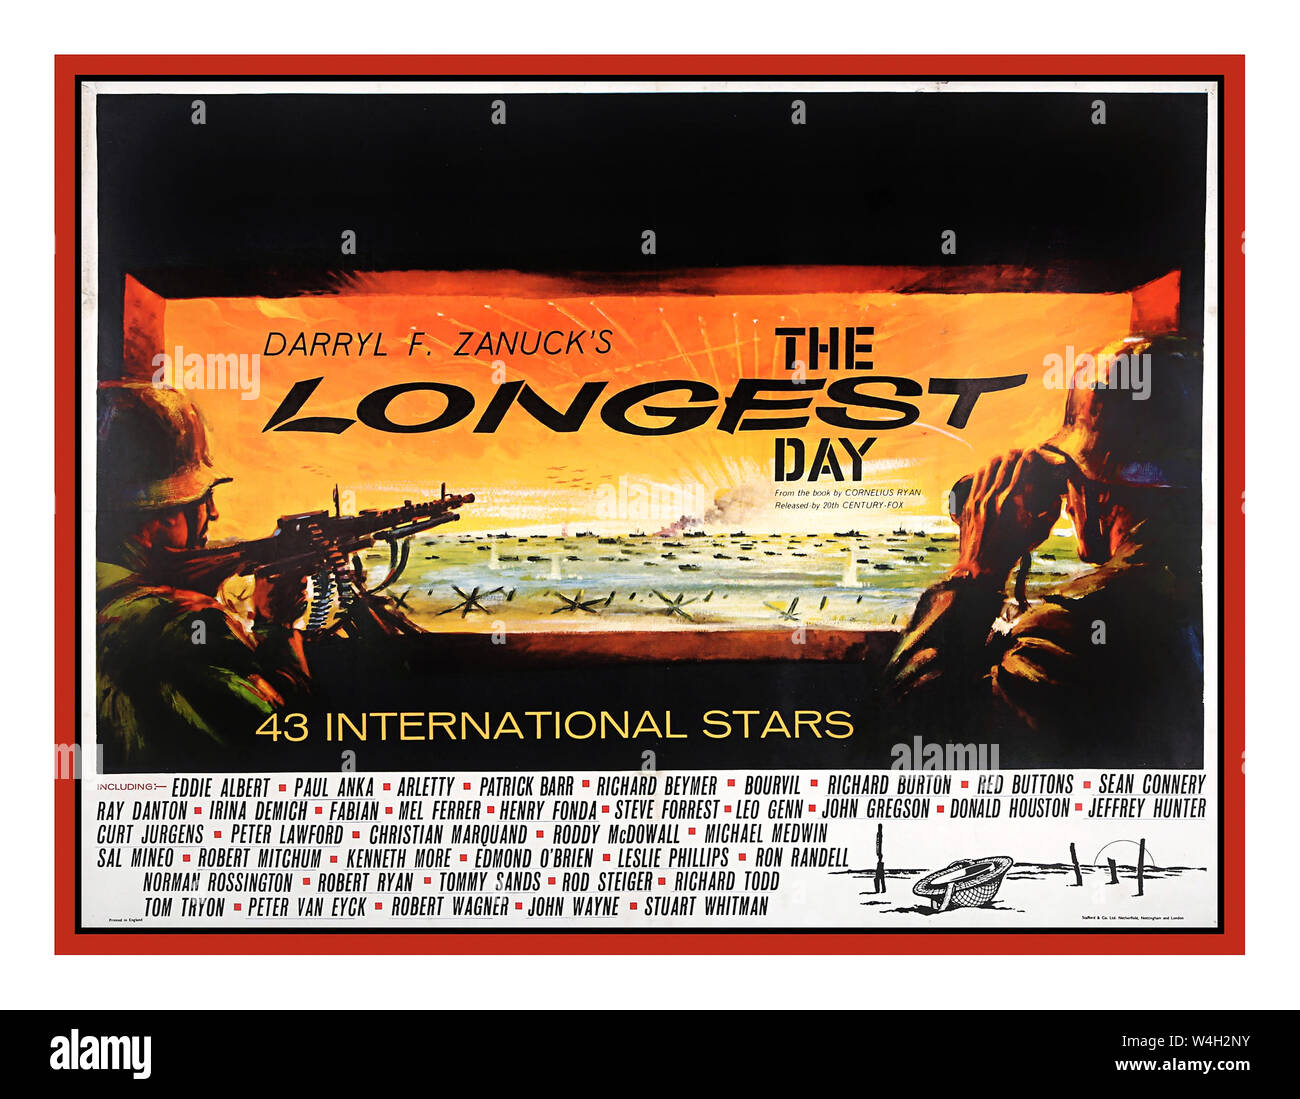 Vintage UK movie cinema film poster for "The Longest Day" (1962). A huge  star-studded cast for the film about D-Day invasion including John Wayne, Richard  Burton and Sean Connery. The Longest Day